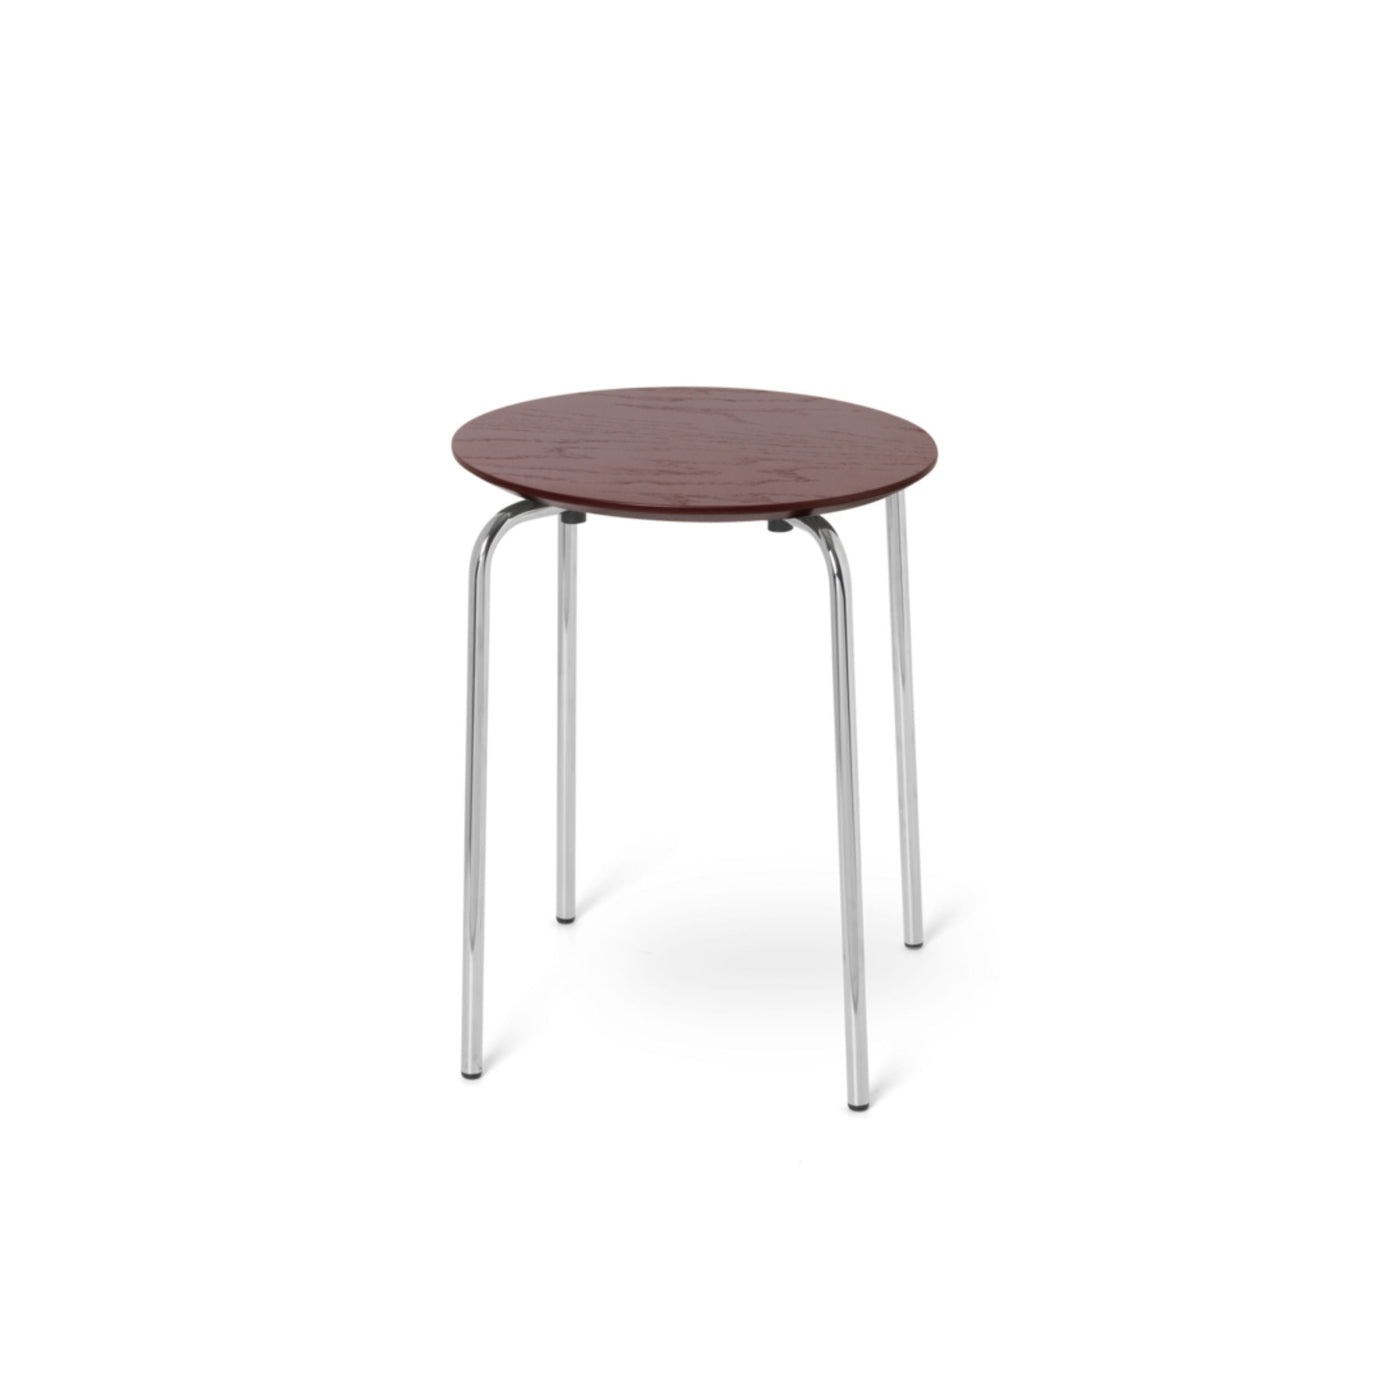 Ferm Living Herman stool with chrome legs. Shop online at someday designs. #colour_red-brown